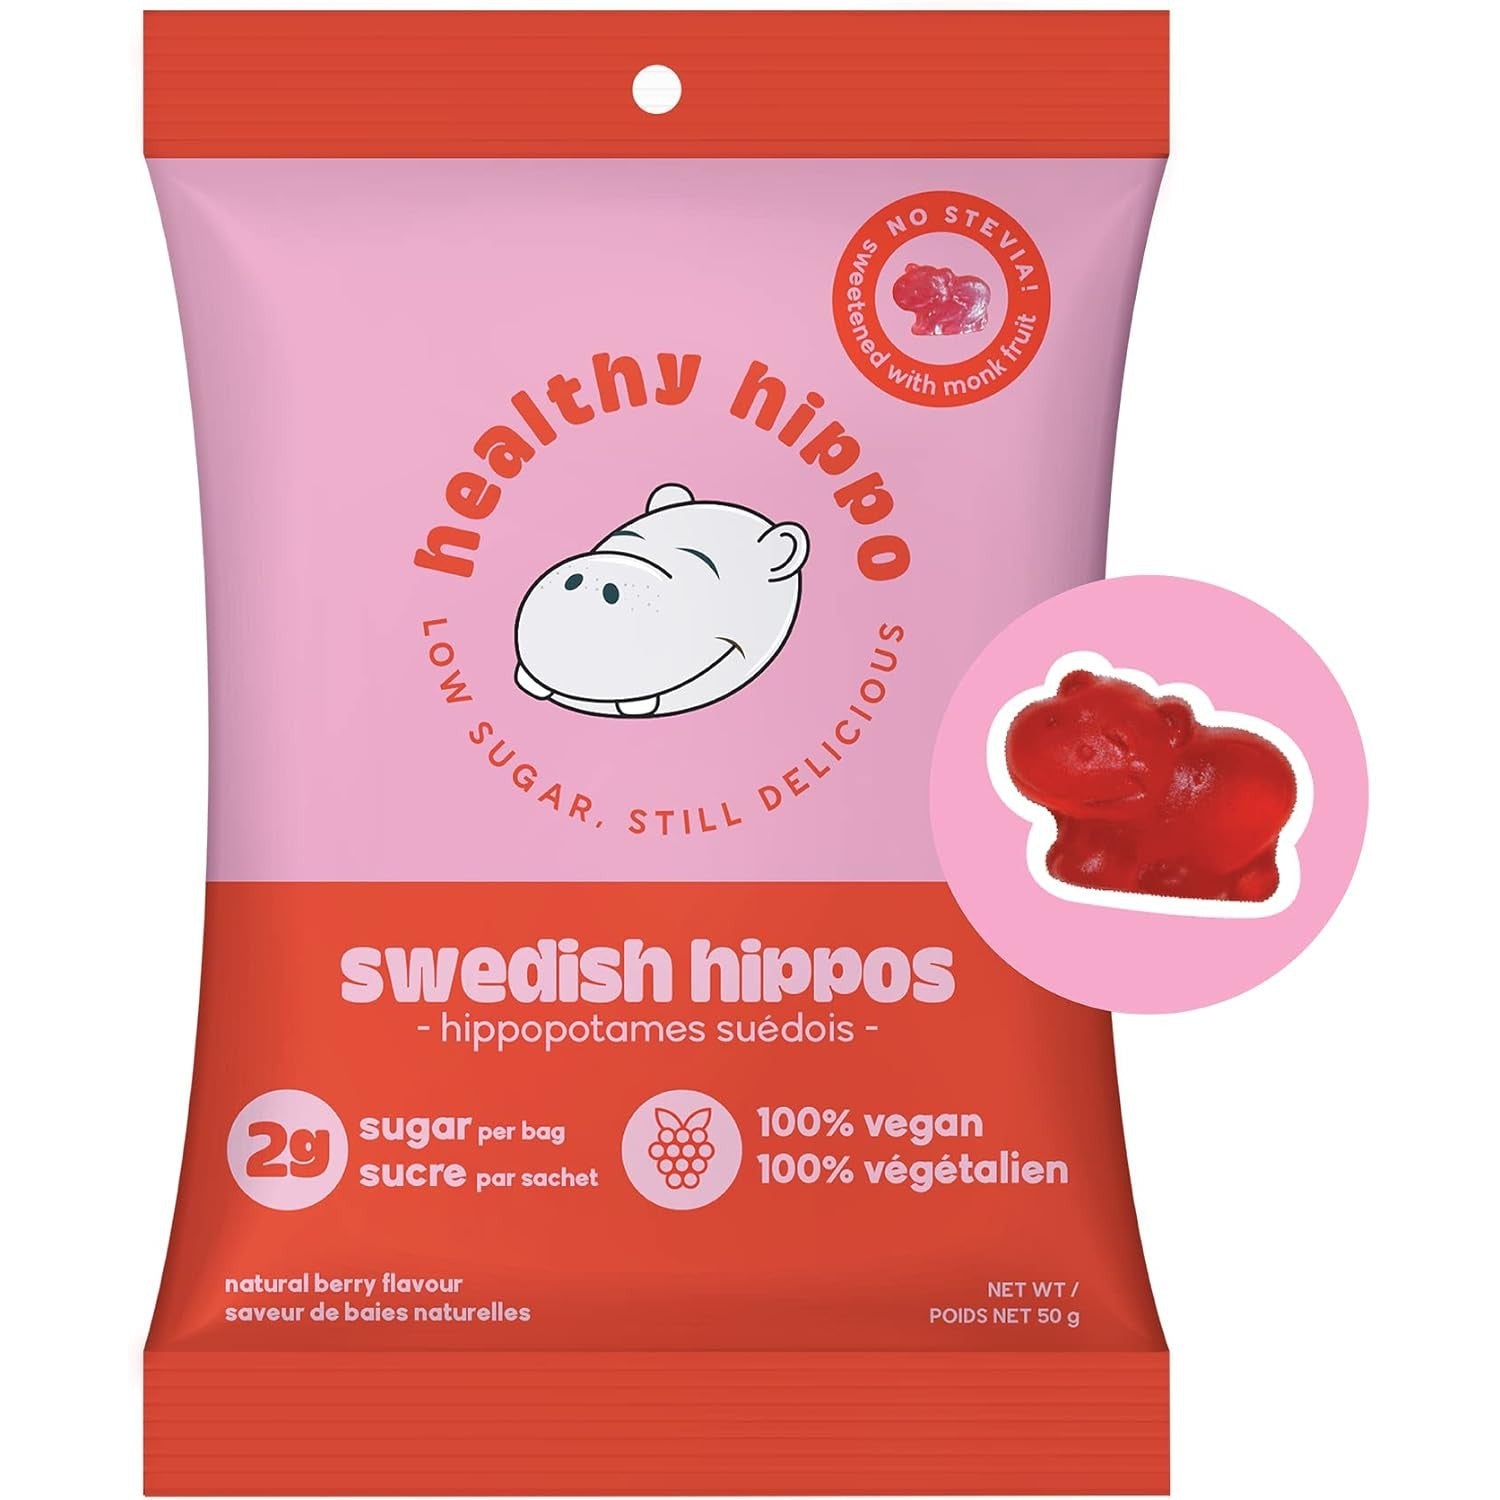 Healthy Hippo Low Sugar Swedish Hippo Gummies Plant Based Gummy Candy Sweetened with Monk Fruit Juice Concentrate not Stevia | No Artificial Ingredients or Sugar Alcohols 50gm